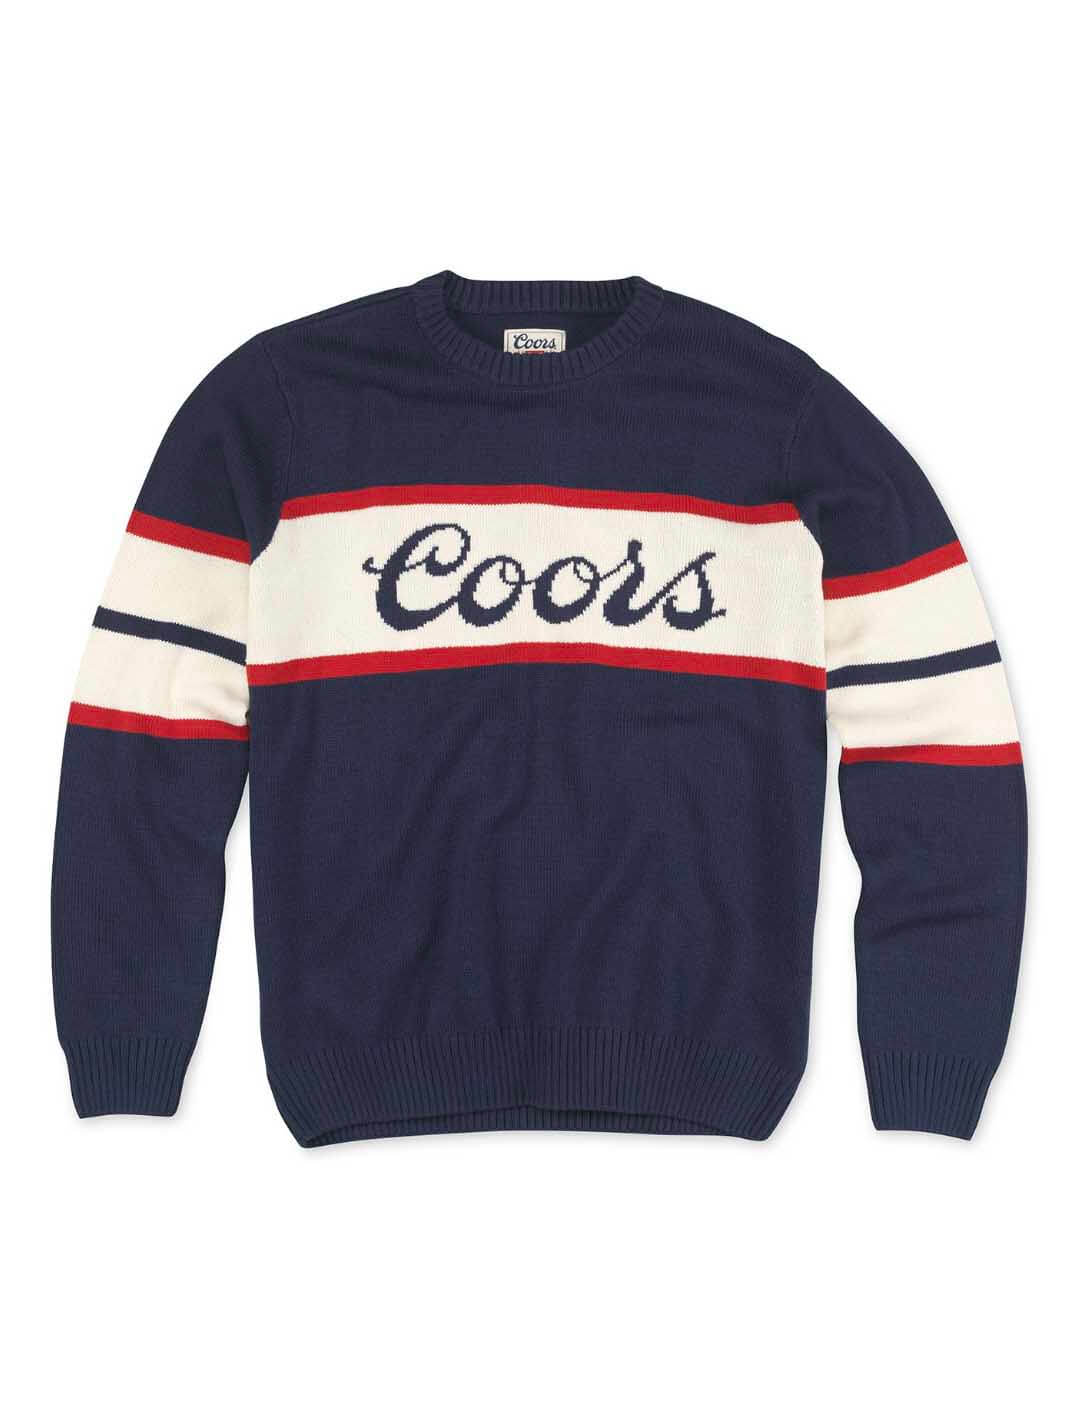 American Needle Coors McCallister Sweater in Navy